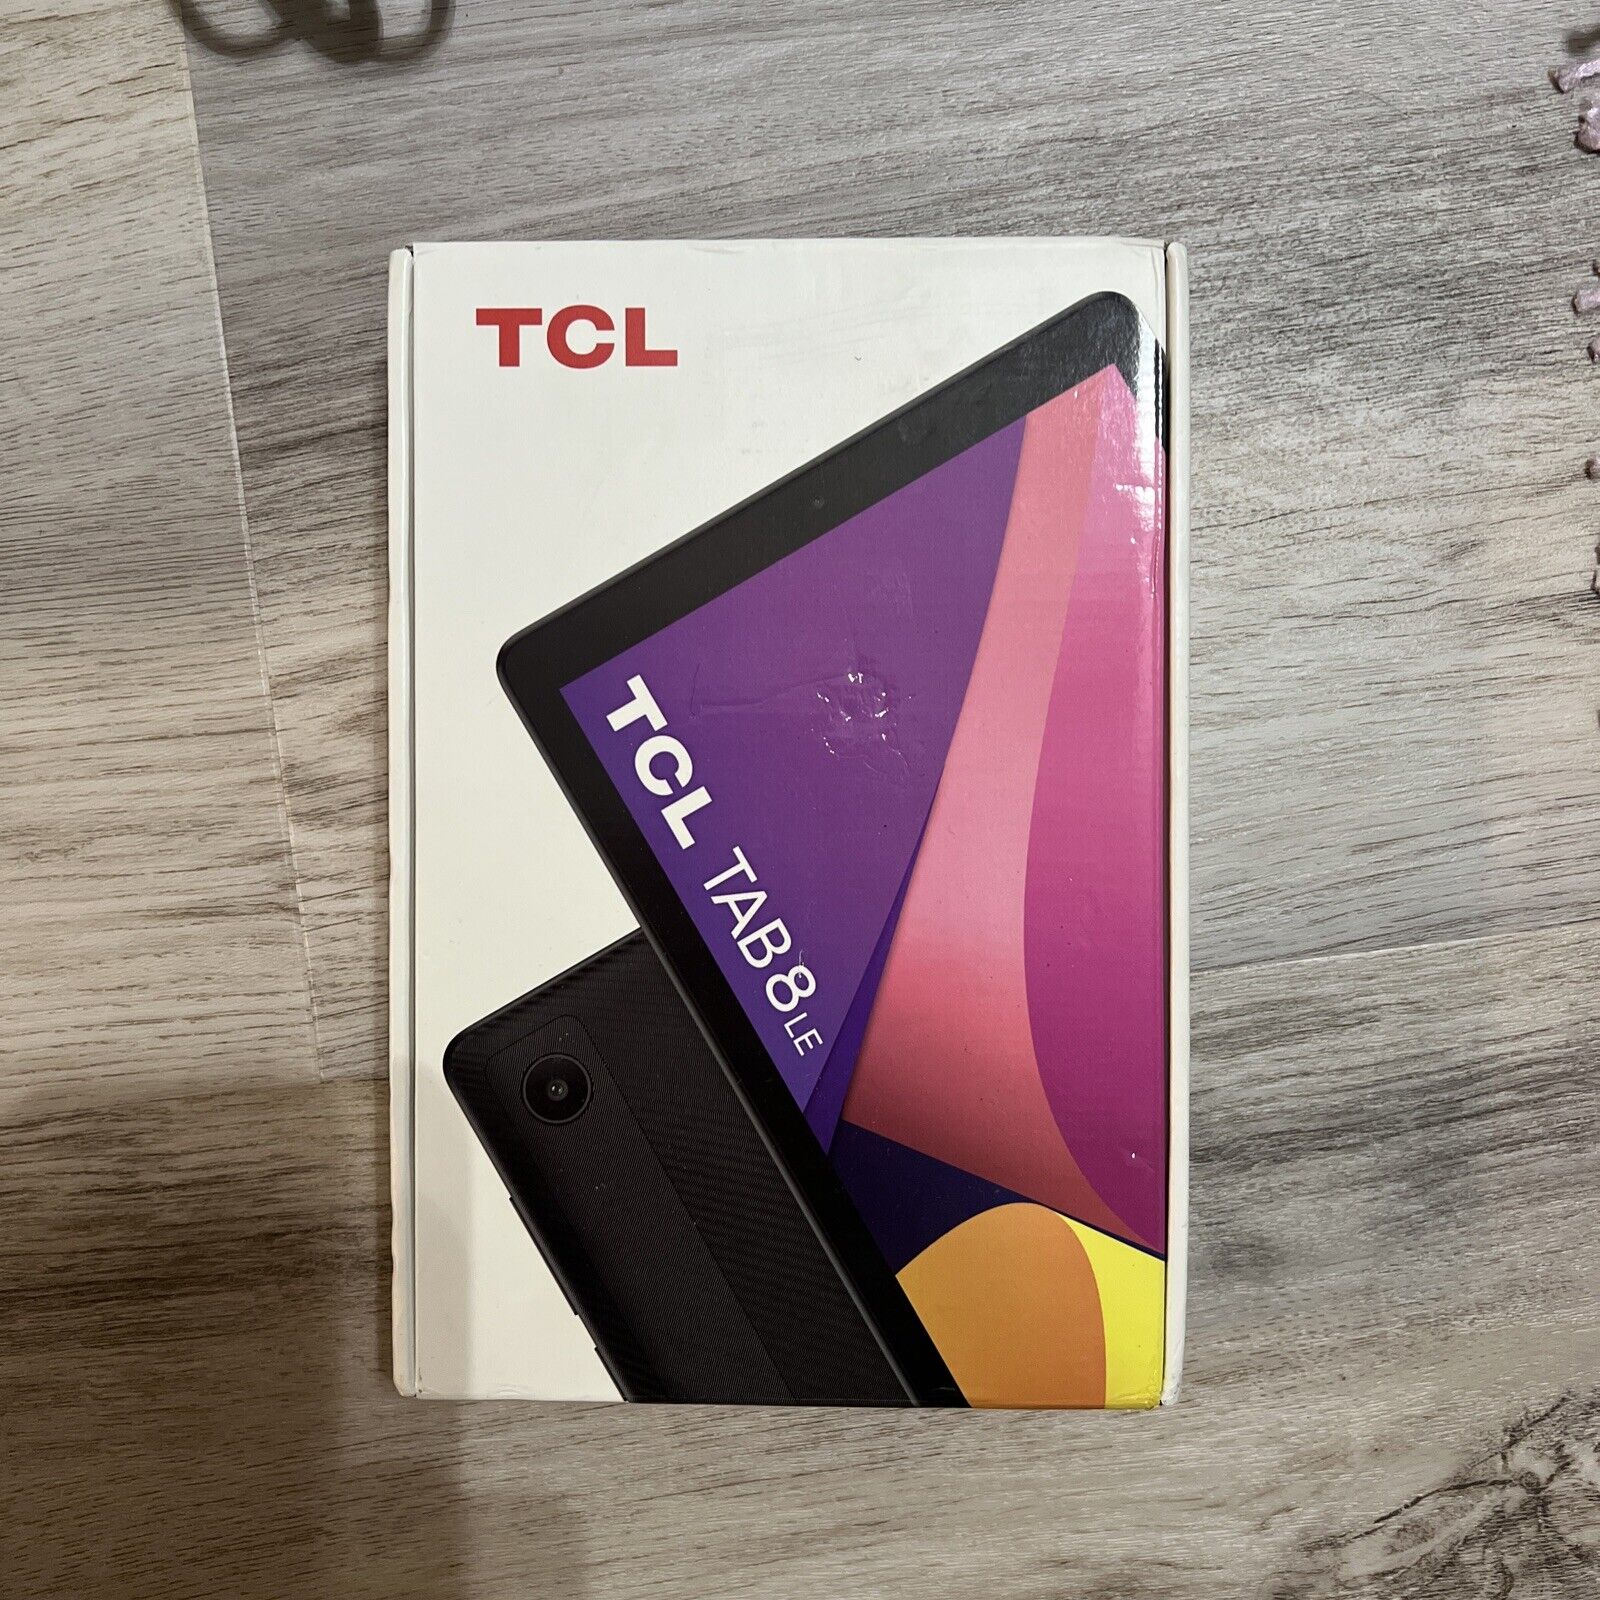 BRAND NEW SEALED TCL Tab 8 LE UNLOCKED 32GB 9048S  4G LTE Android Black Tablet